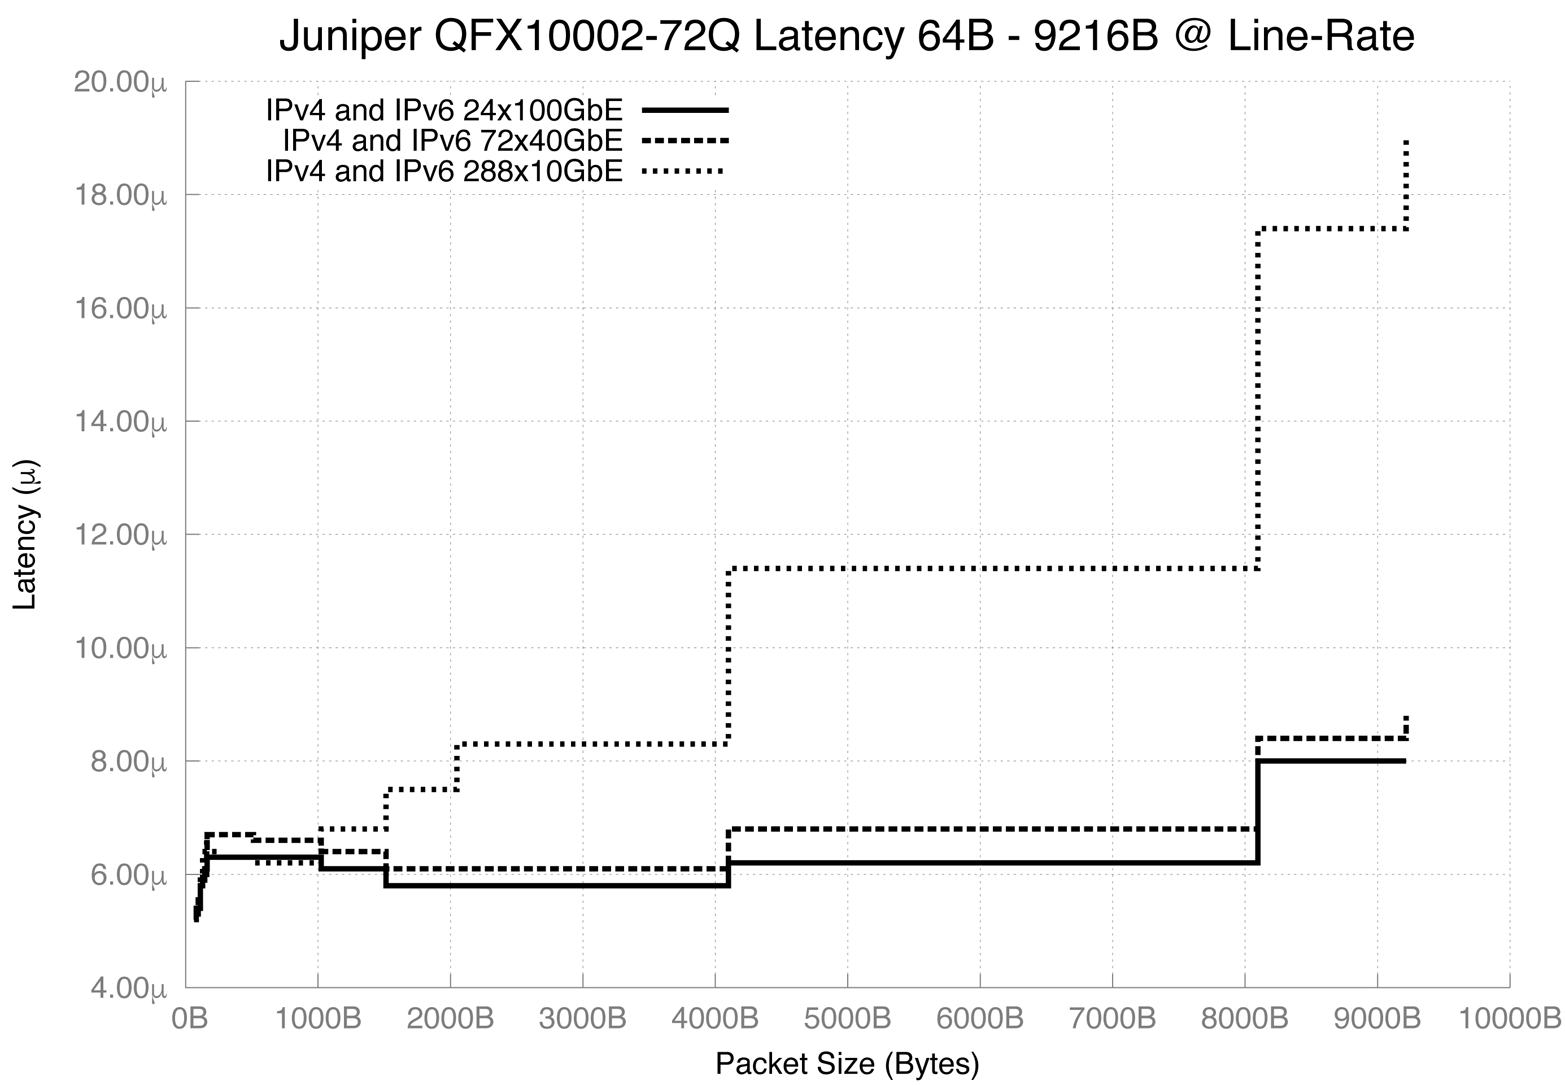 Graph showing Juniper QFX10002-72Q latency versus packet size for 100/40/10GbE, tested at line-rate